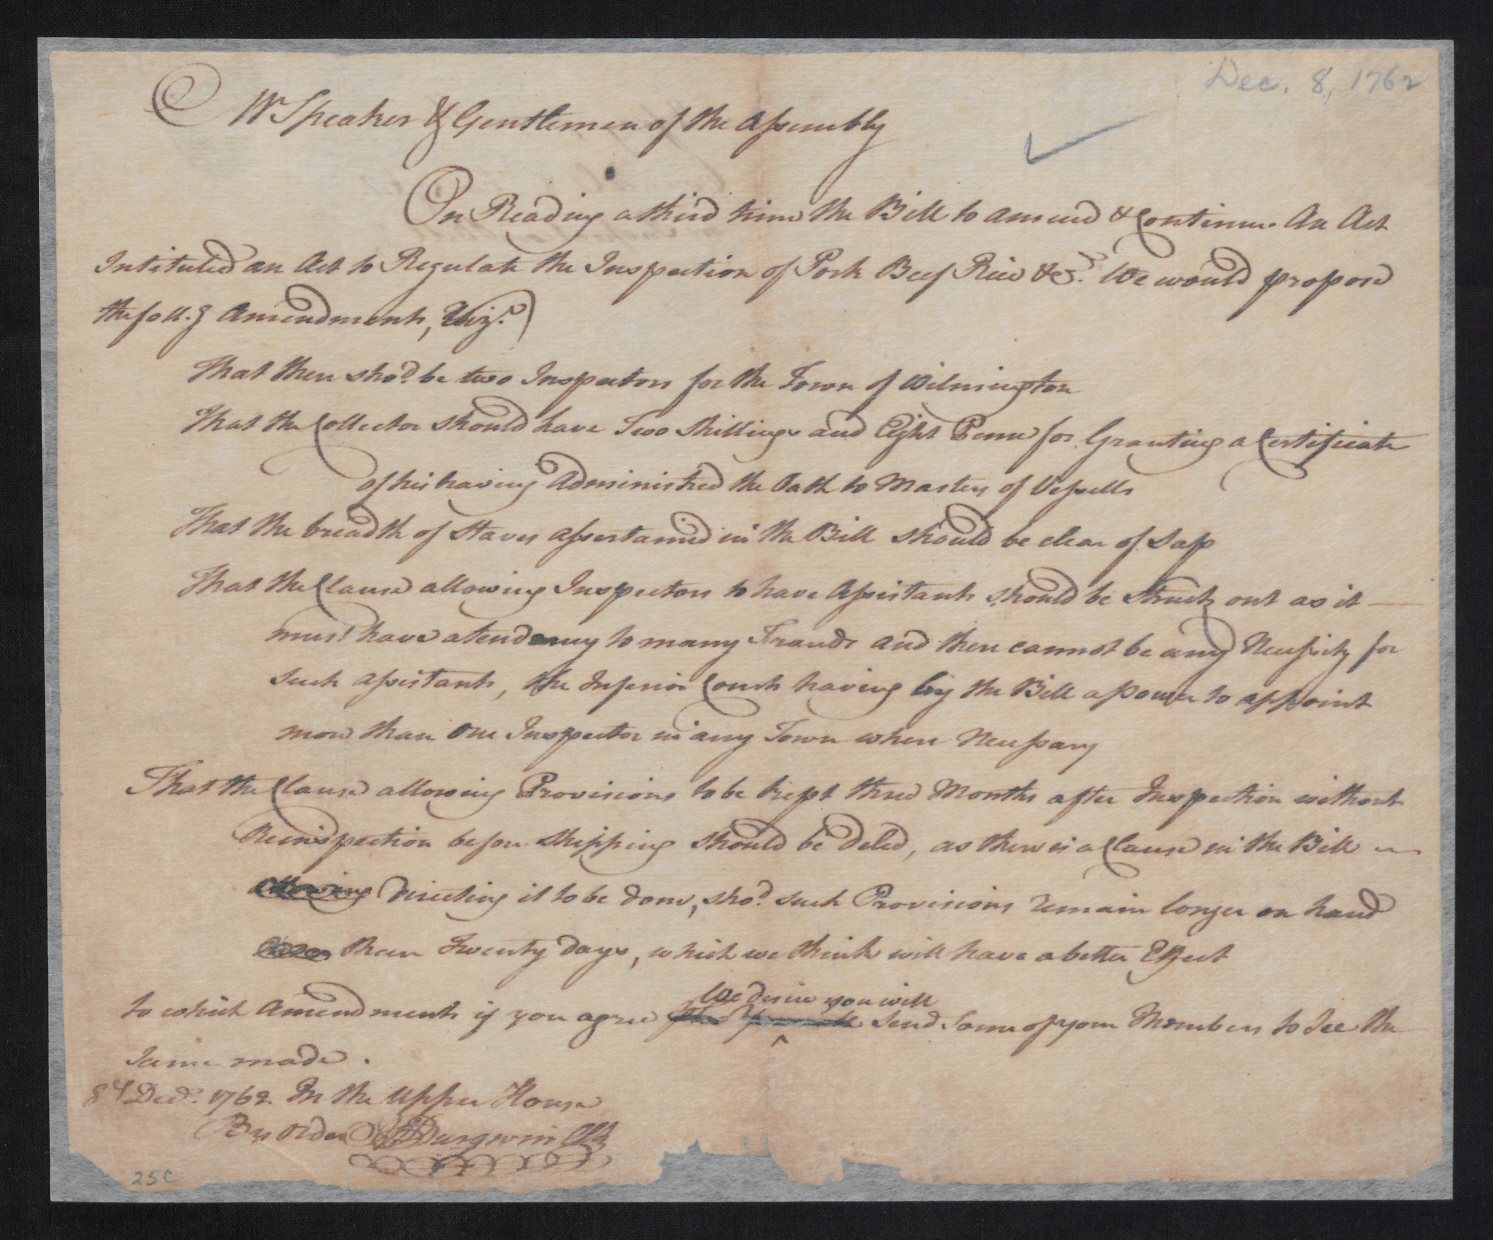 General Assembly Session Records (1760-1762)